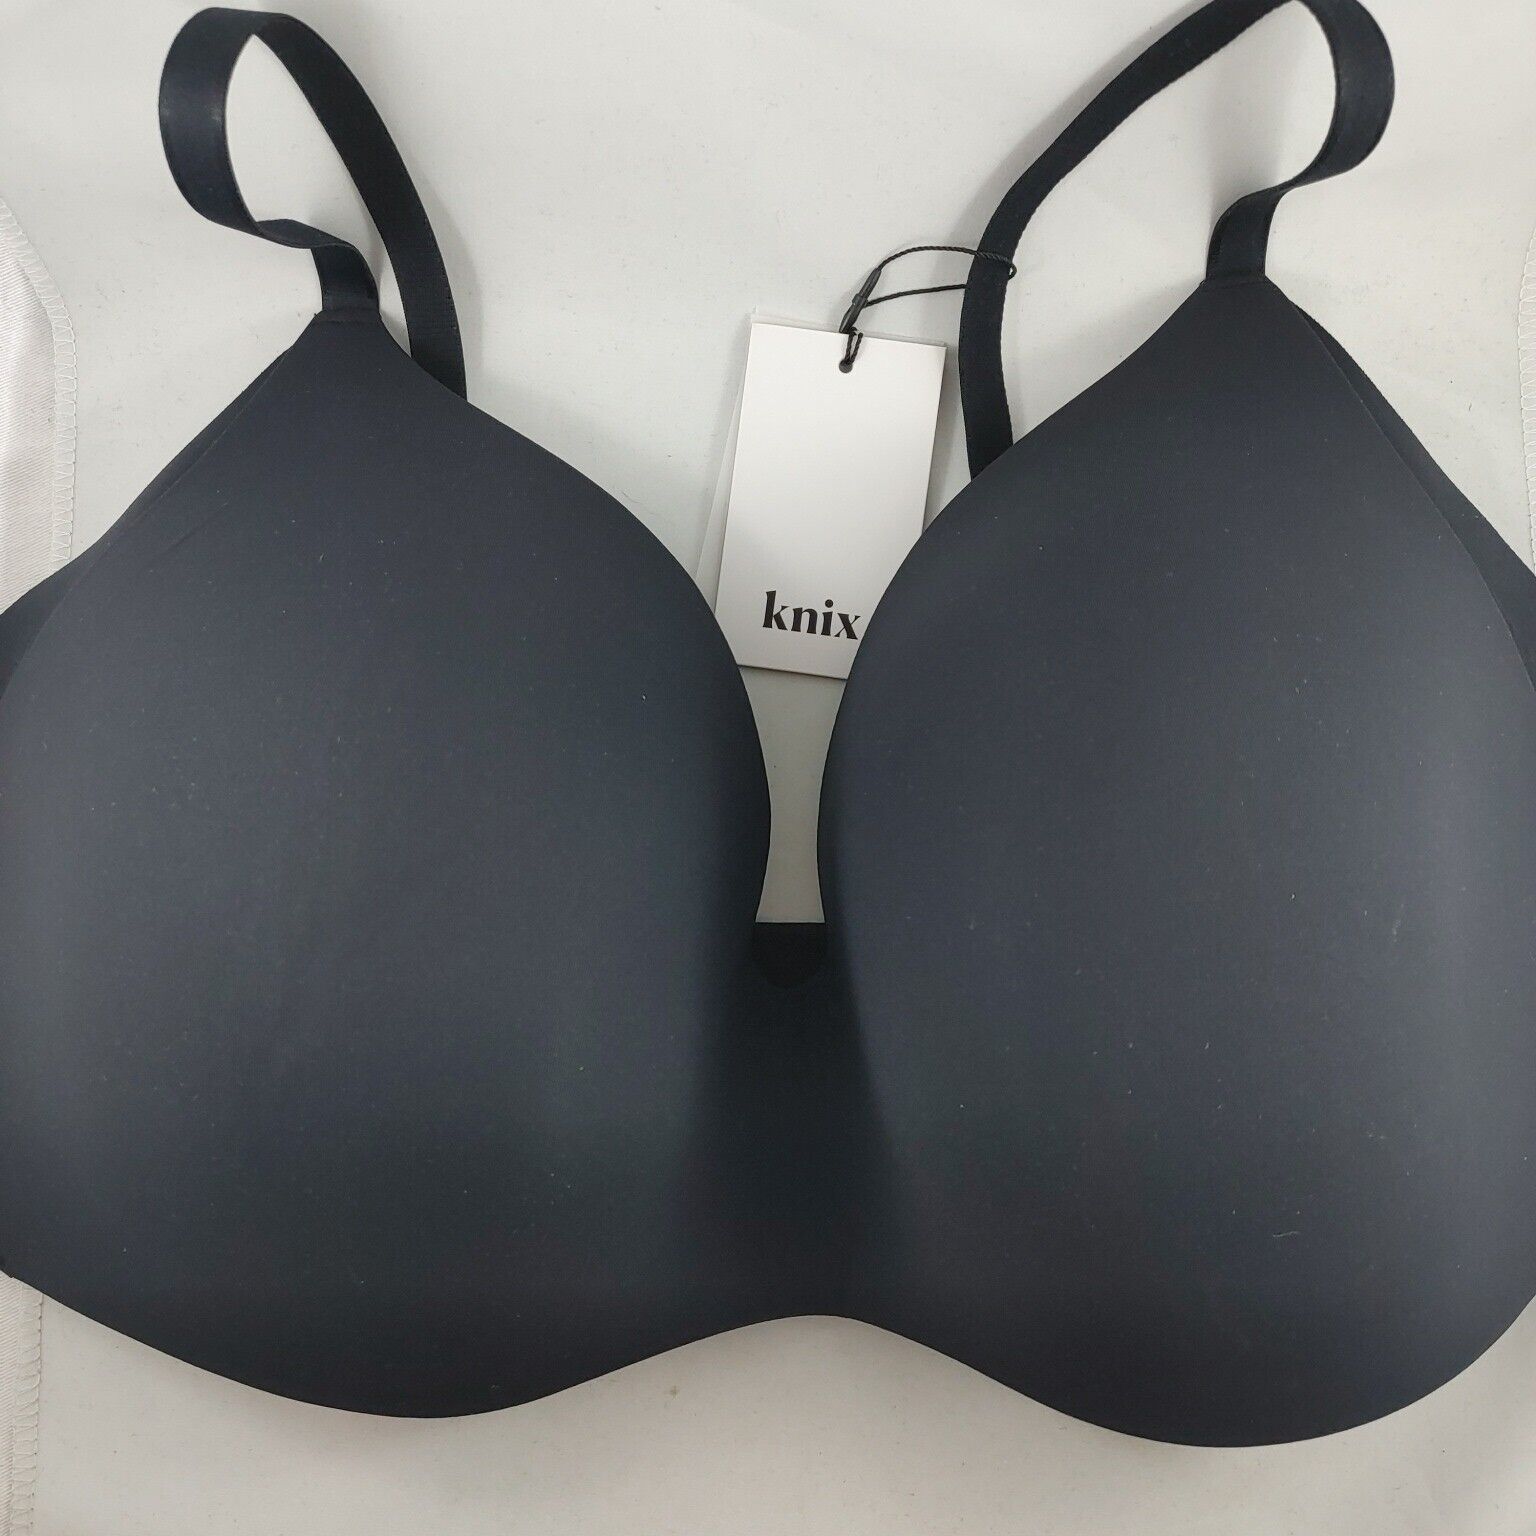 KNIX Wing Woman Contour Bra in Black - KNIX Size 8+ Padded